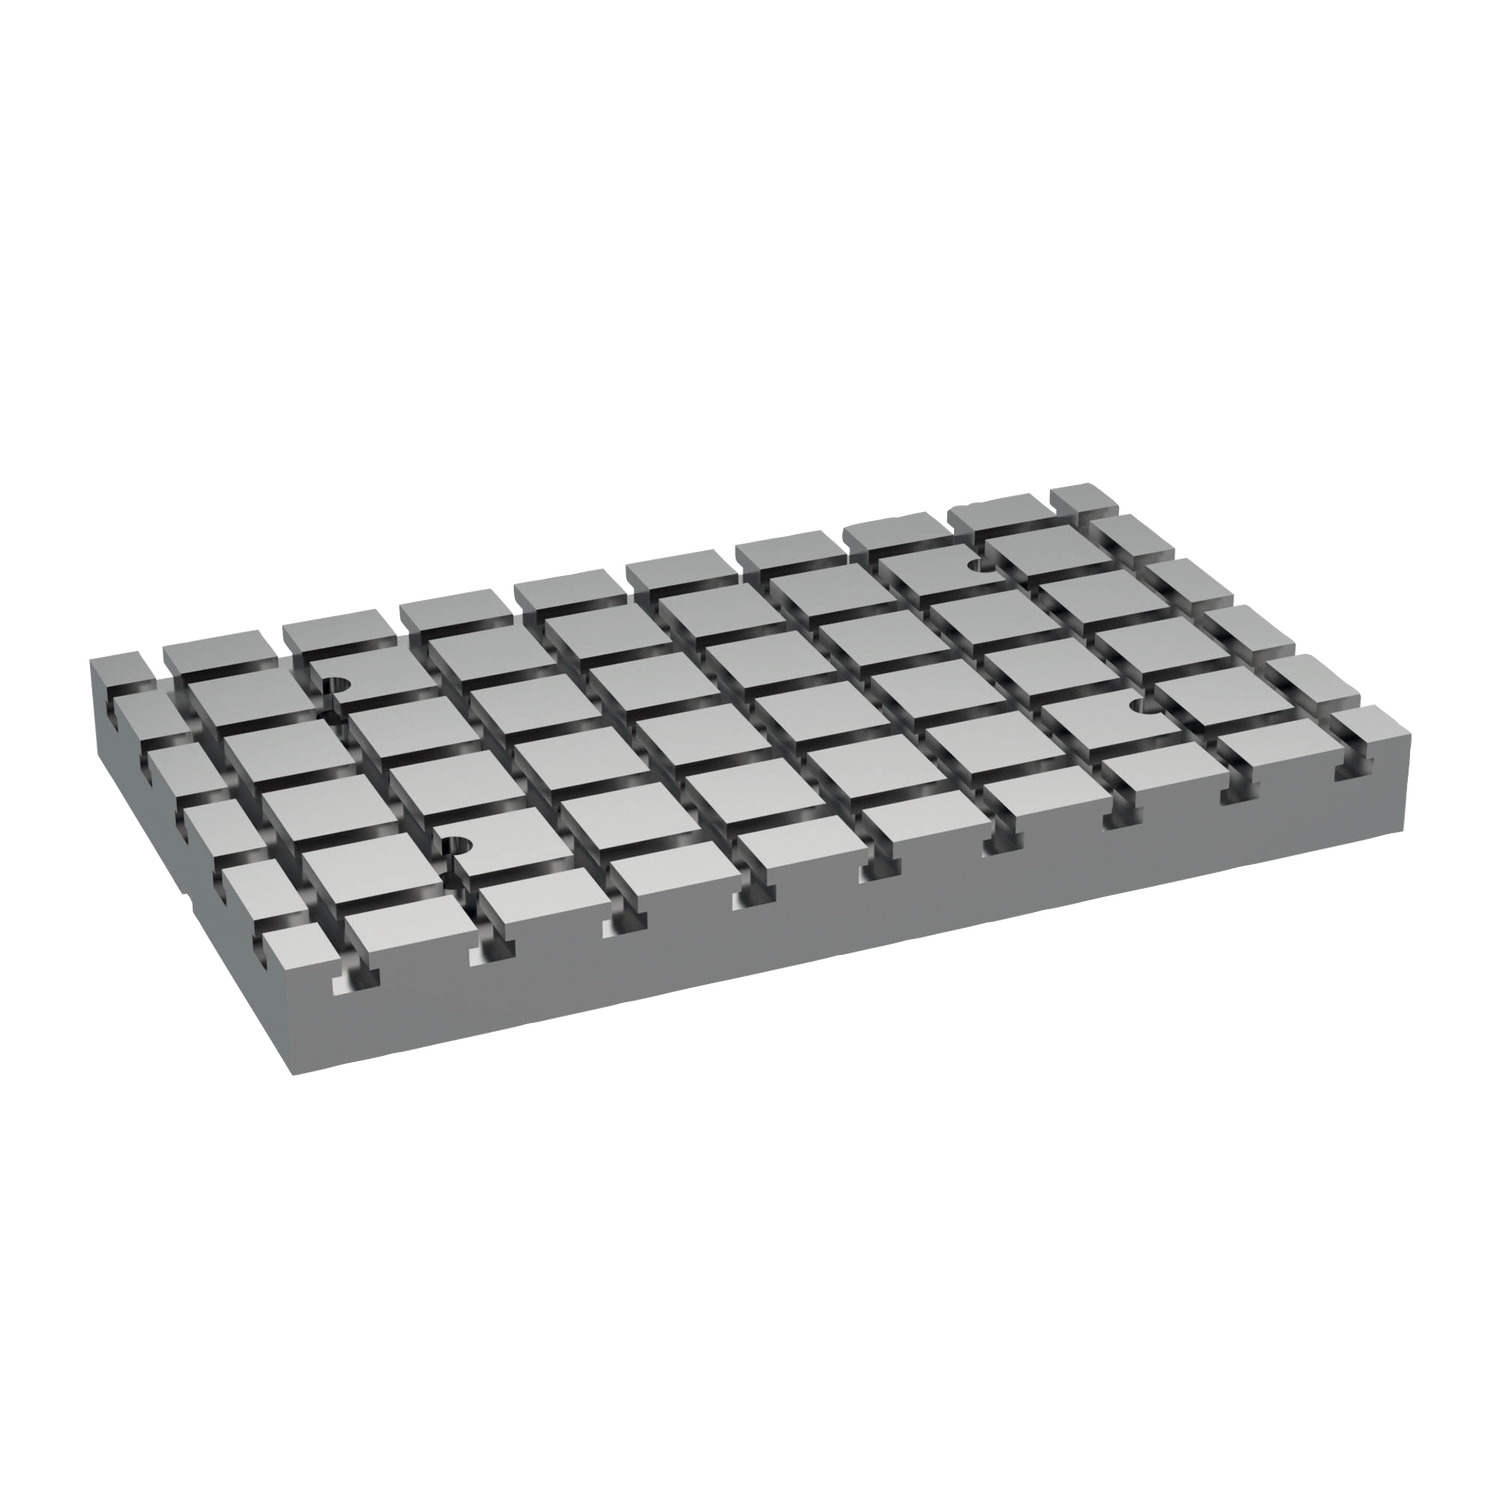 19580.W0300 Base plate -Tool steel. Price on application